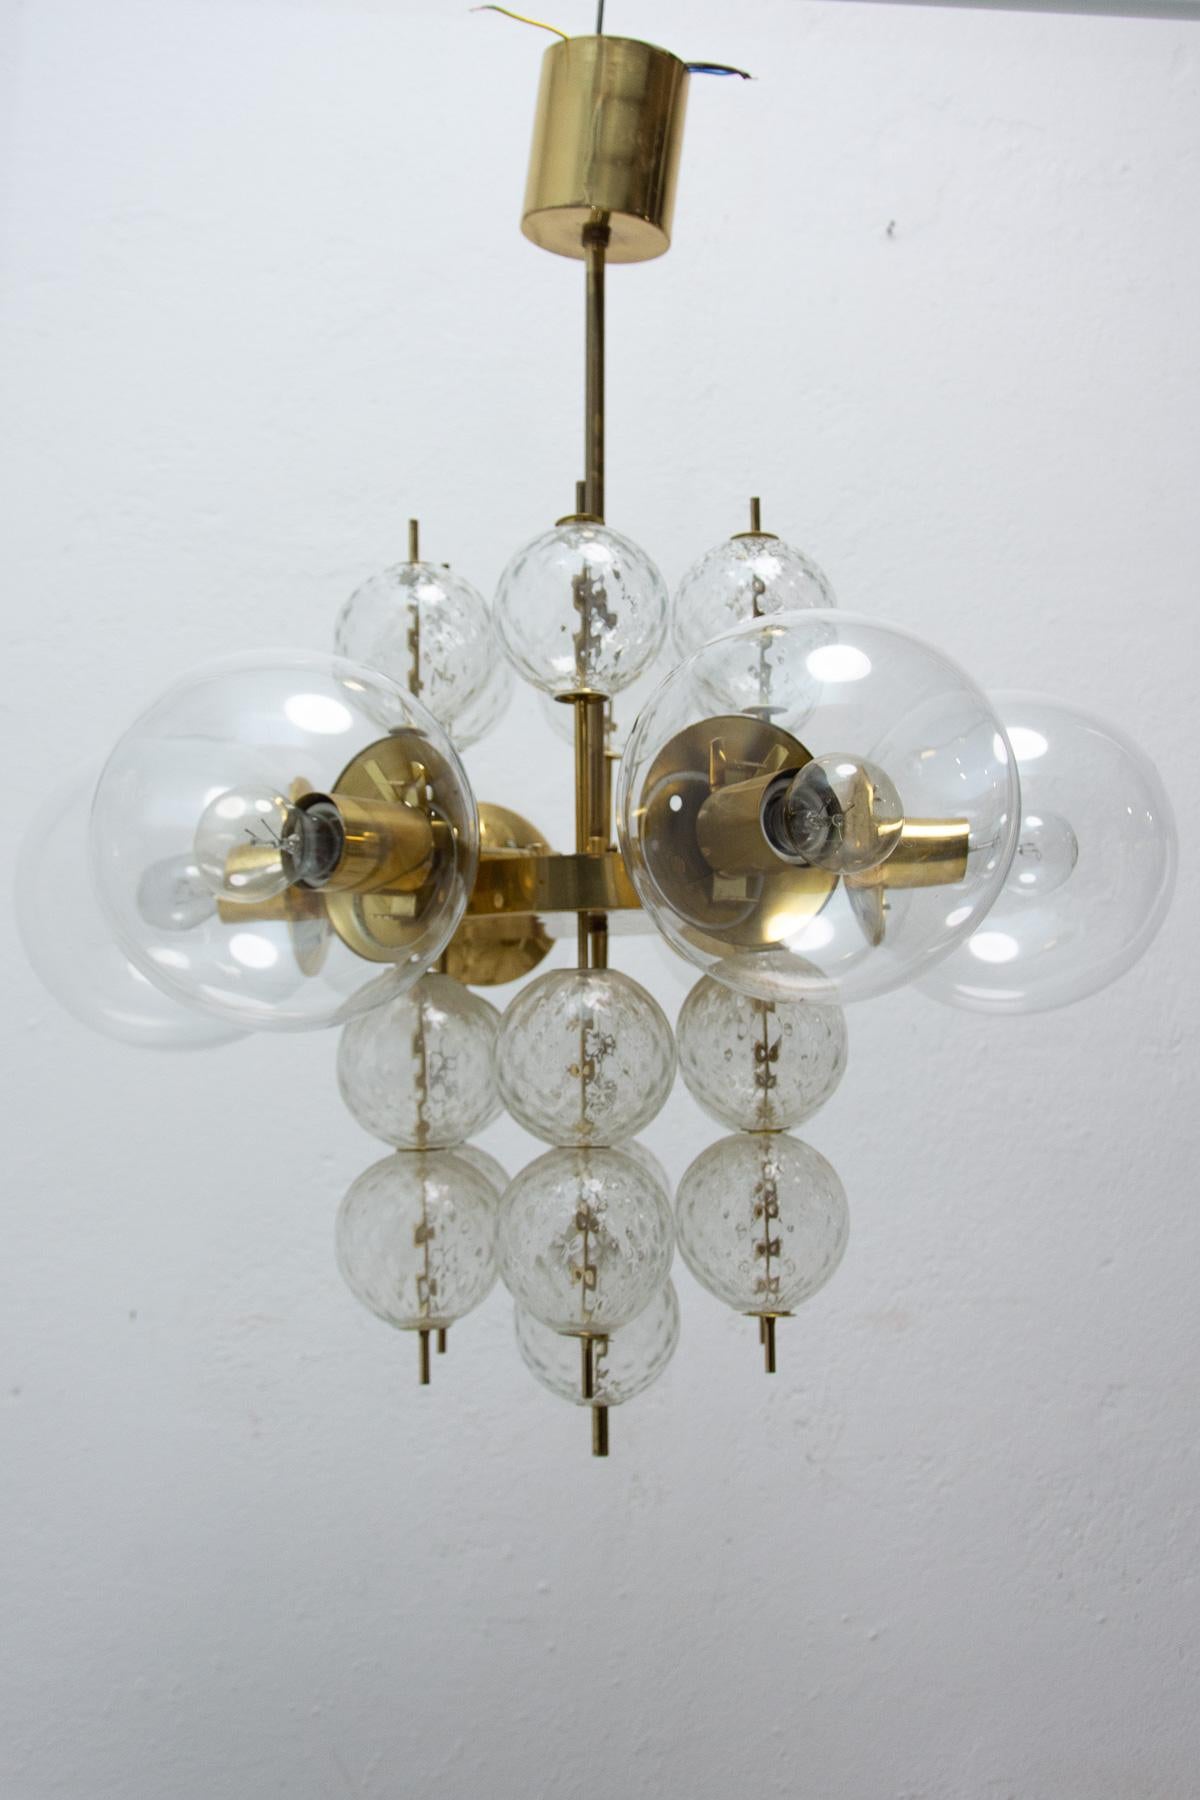 This chandelier was made by Kamenický Šenov company in the 1970´s in the former Czechoslovakia.

It is made of black sheet metal, glass, chrome and metal.

New wiring, cleaned, in good Vintage condition.

E27 bulbs, UP to 250 V.

